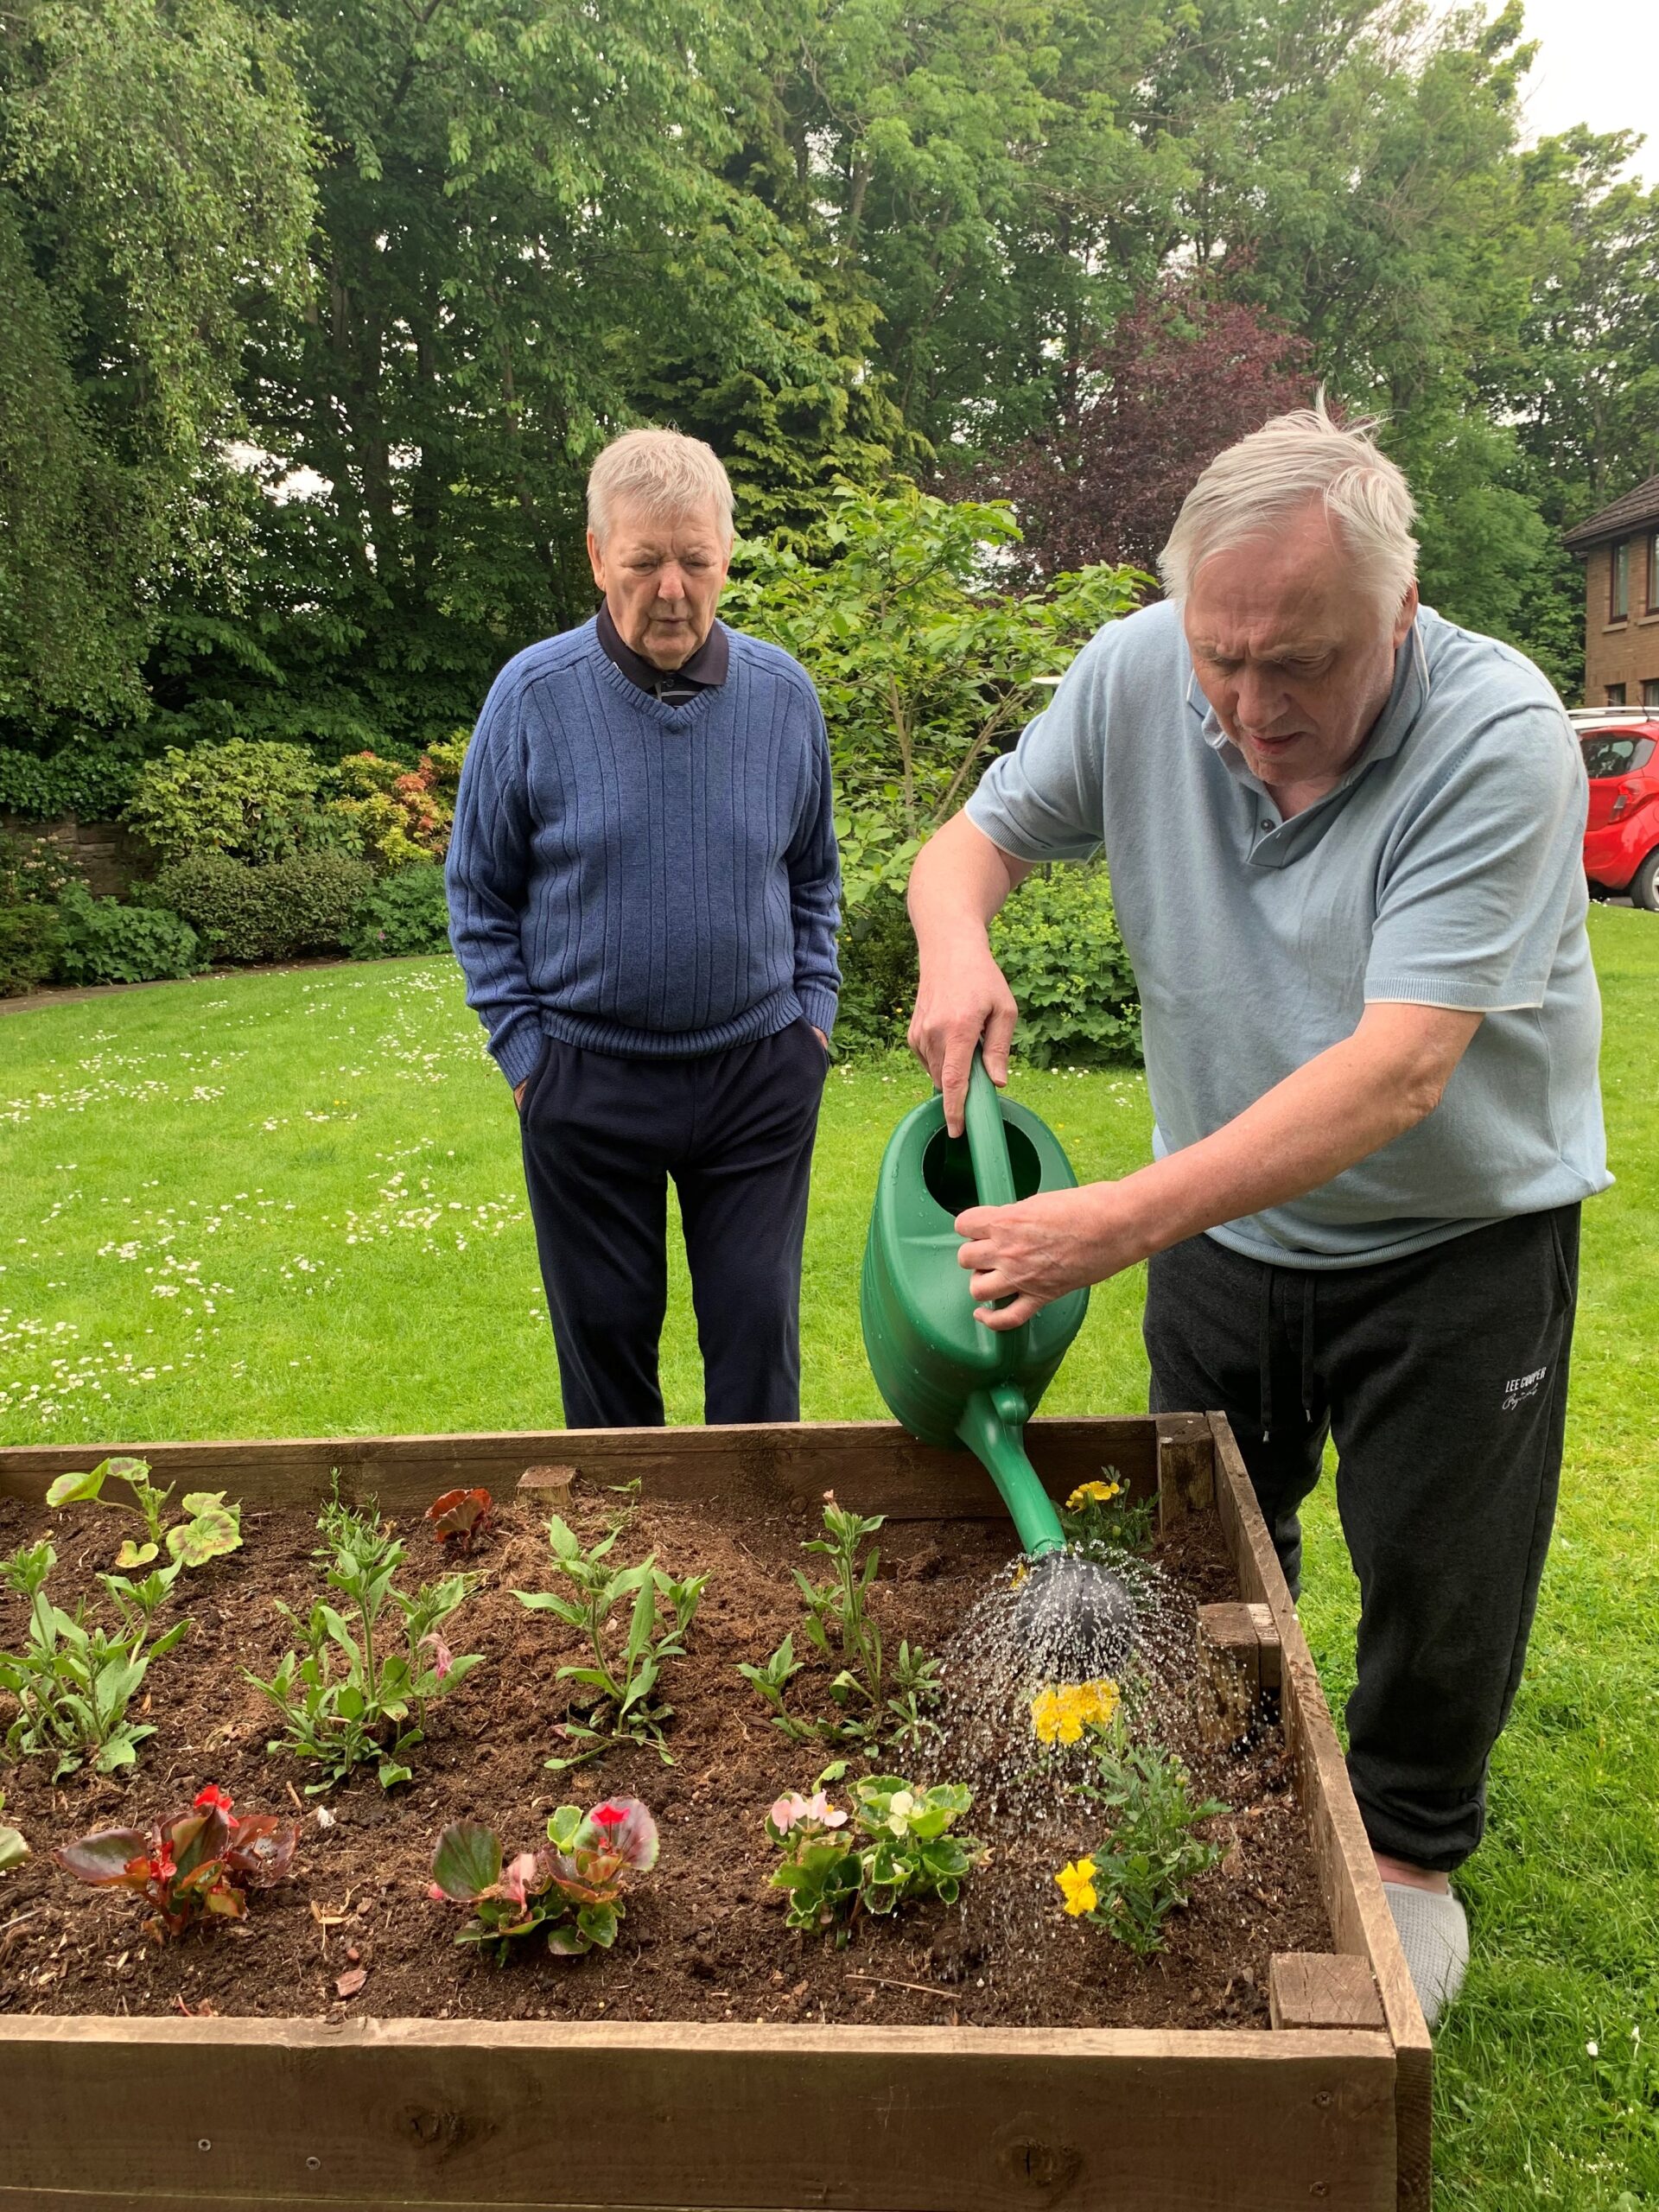 Residents Helping to Water Plants